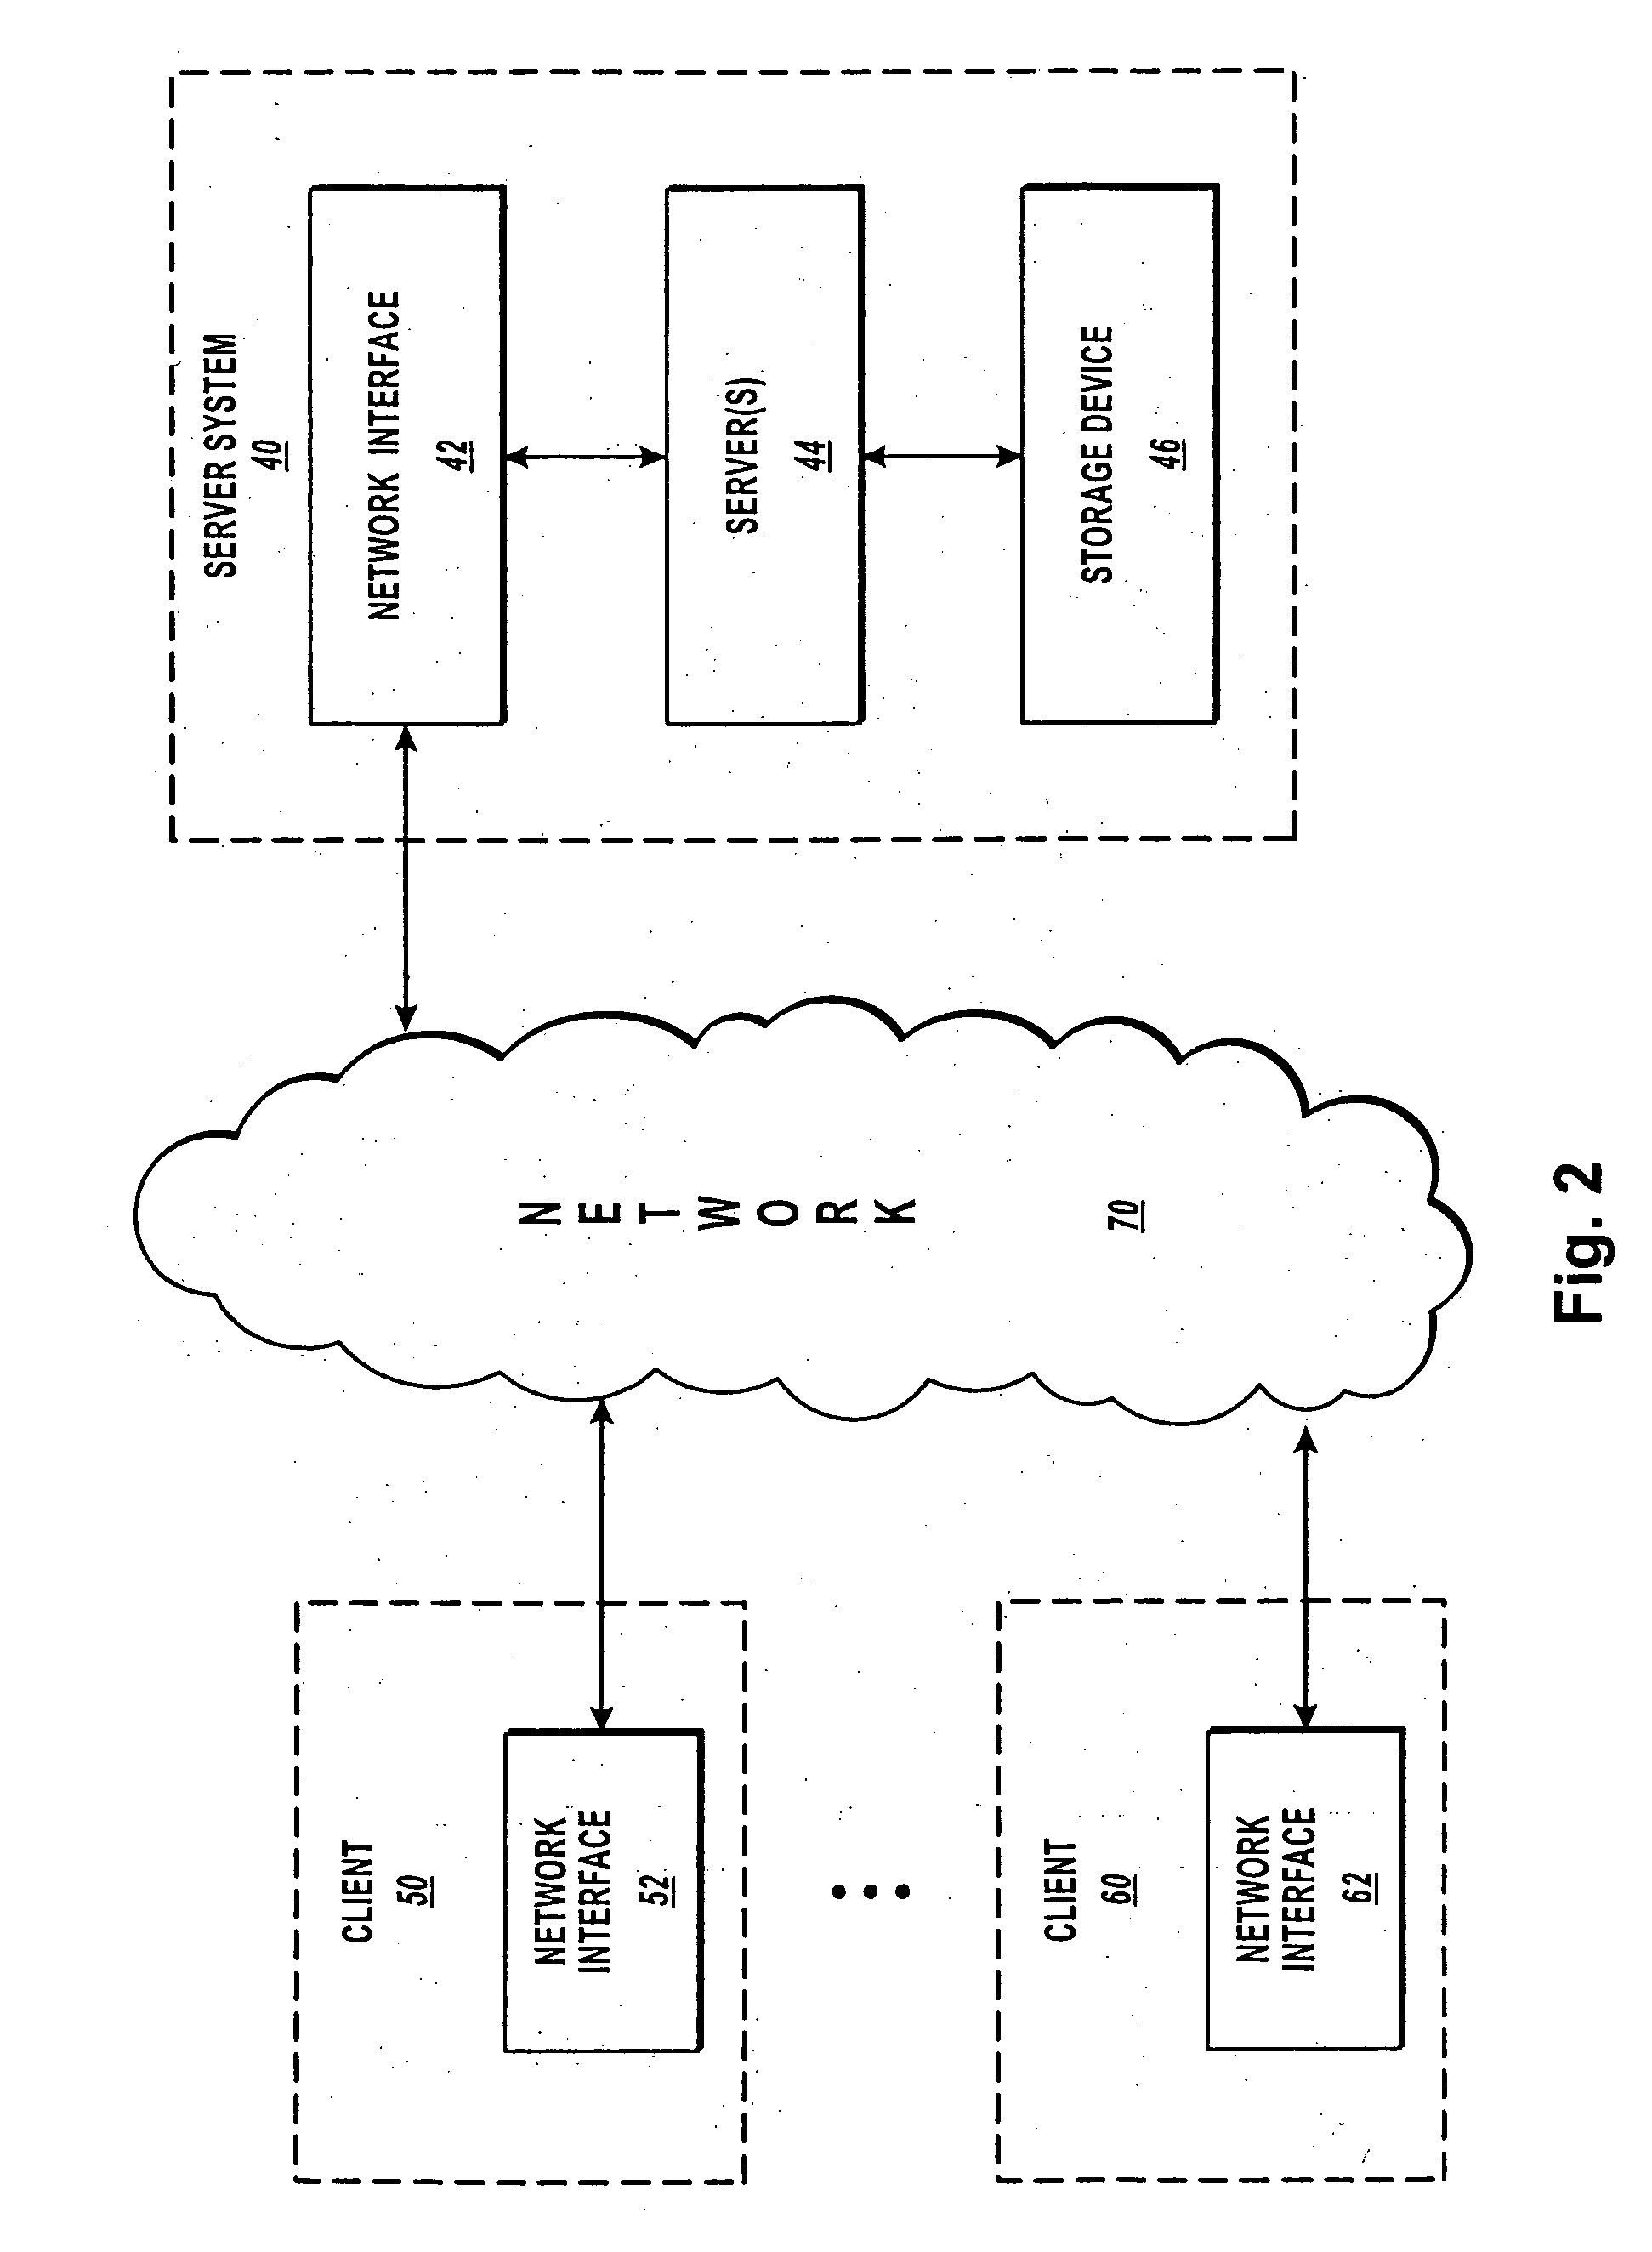 Systems and methods for providing a dynamic interaction router